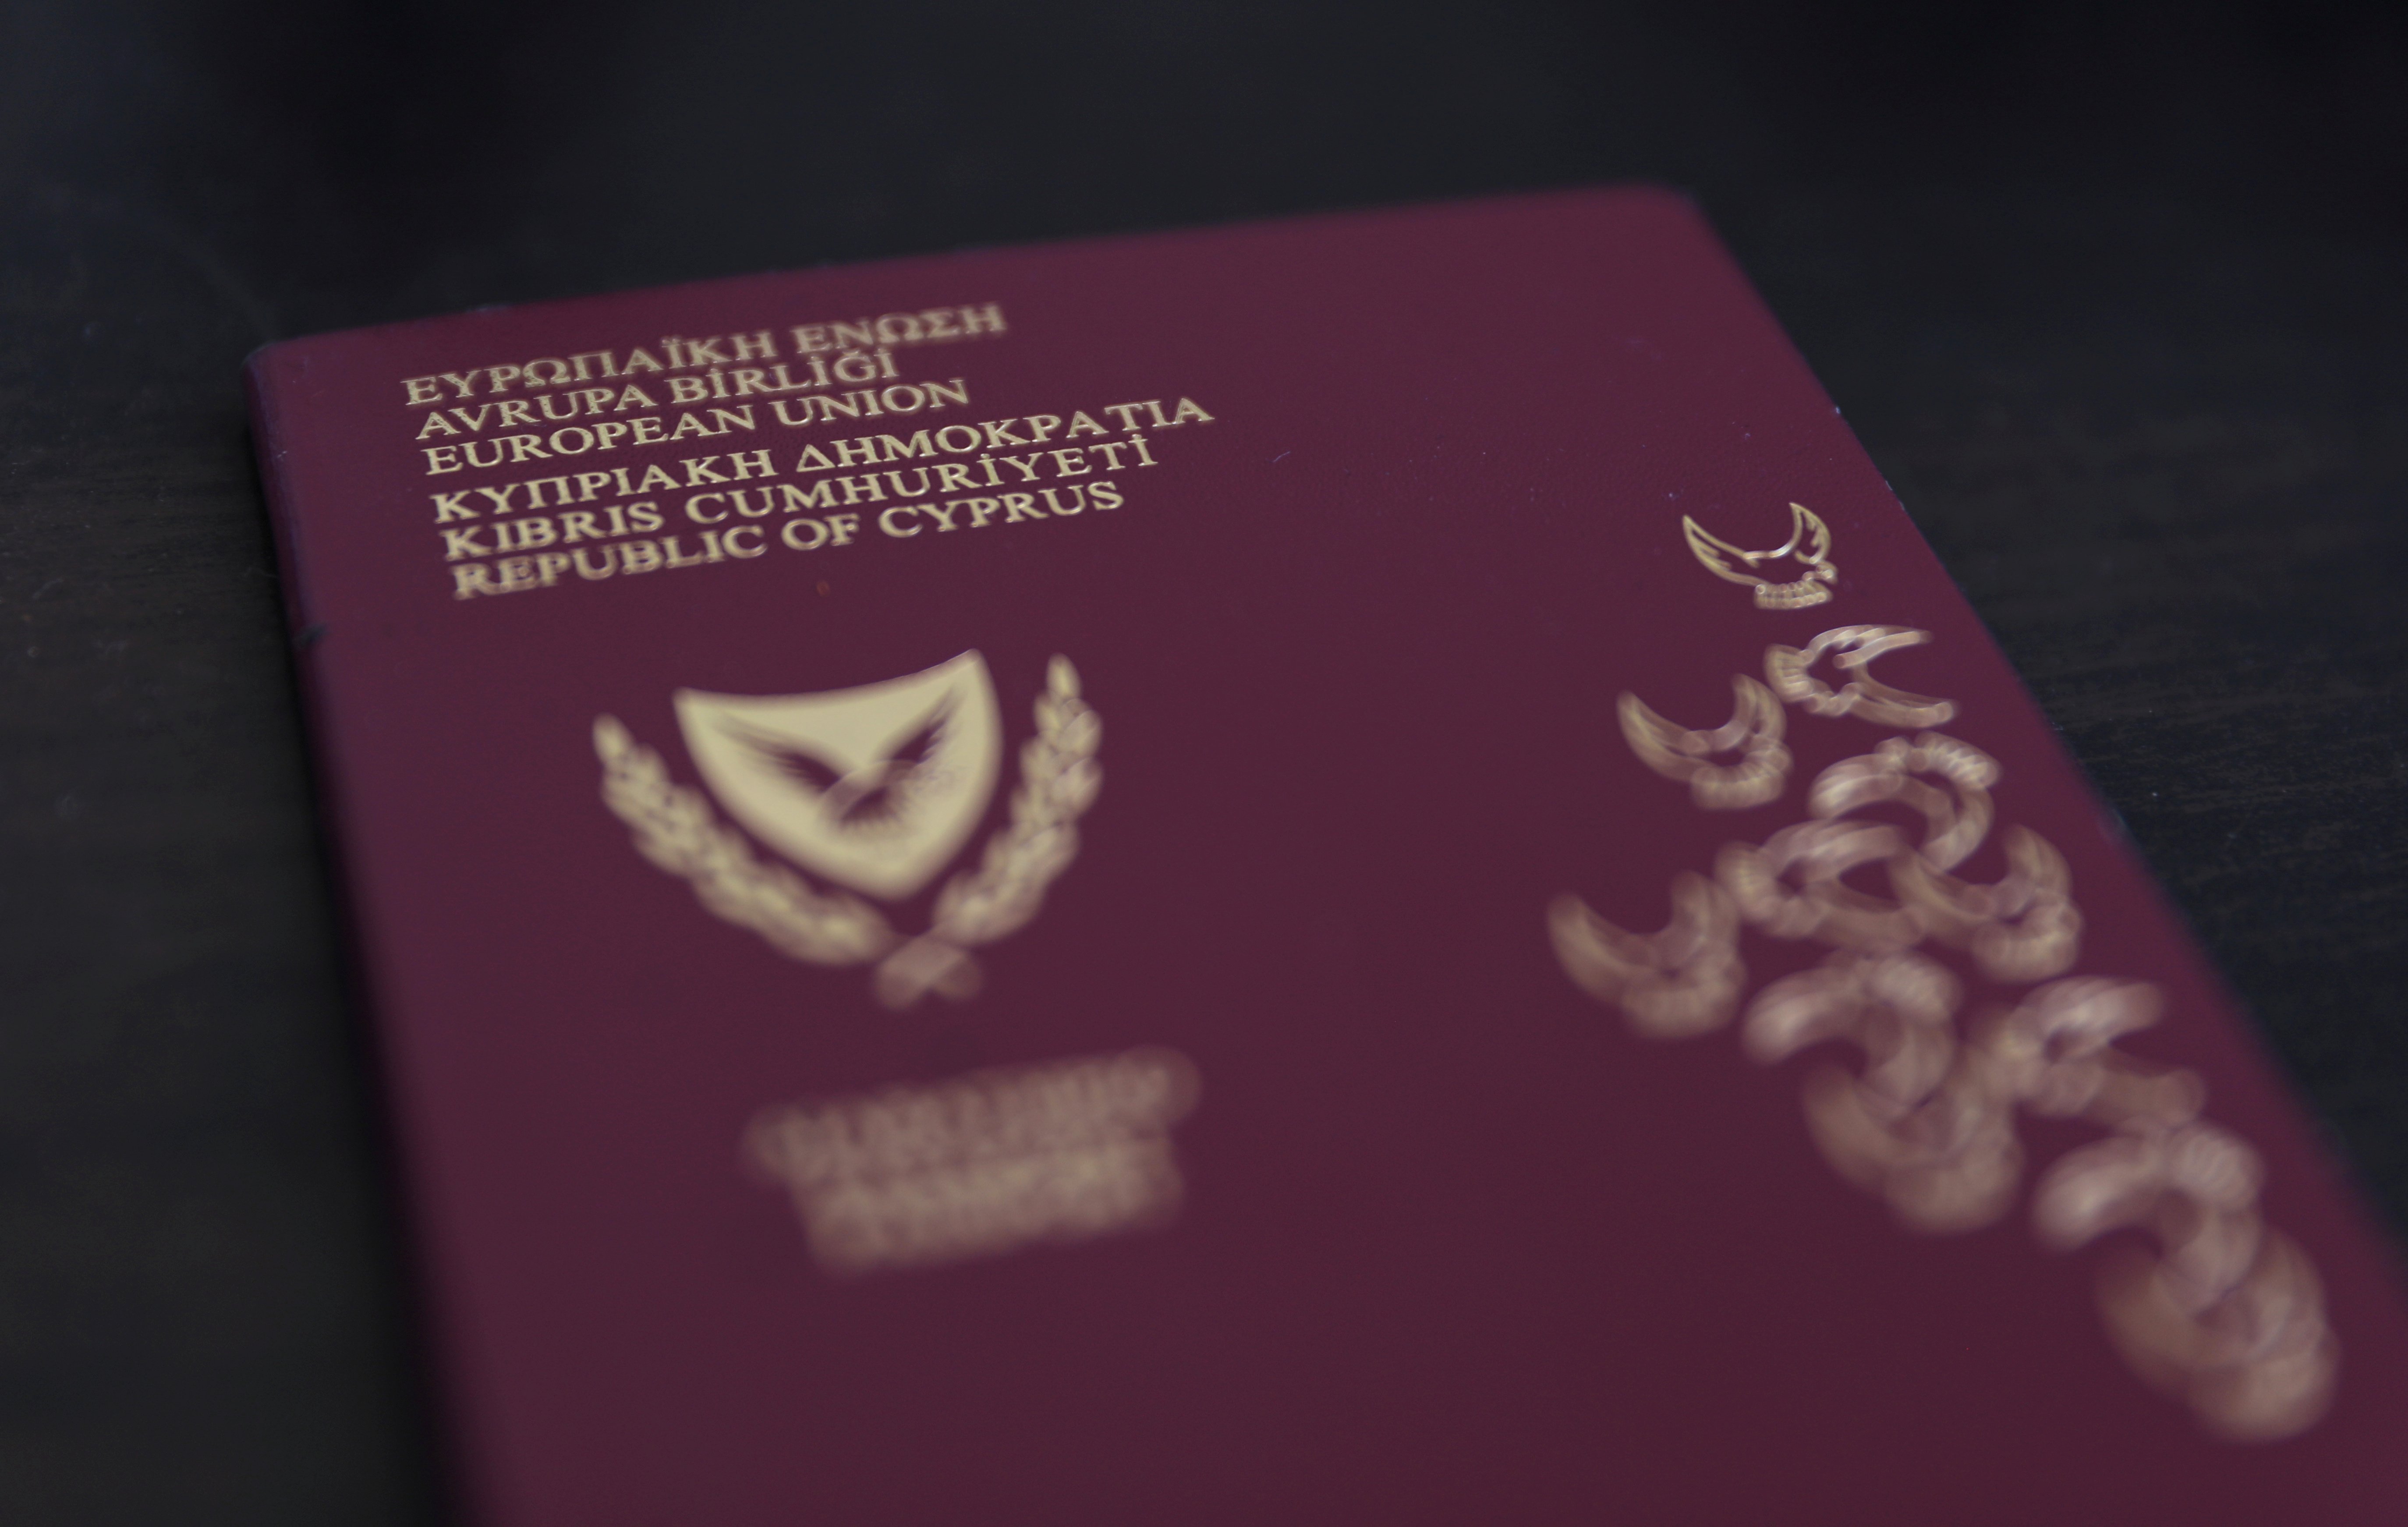 Cabinet appoints committee to look into passport scheme going back